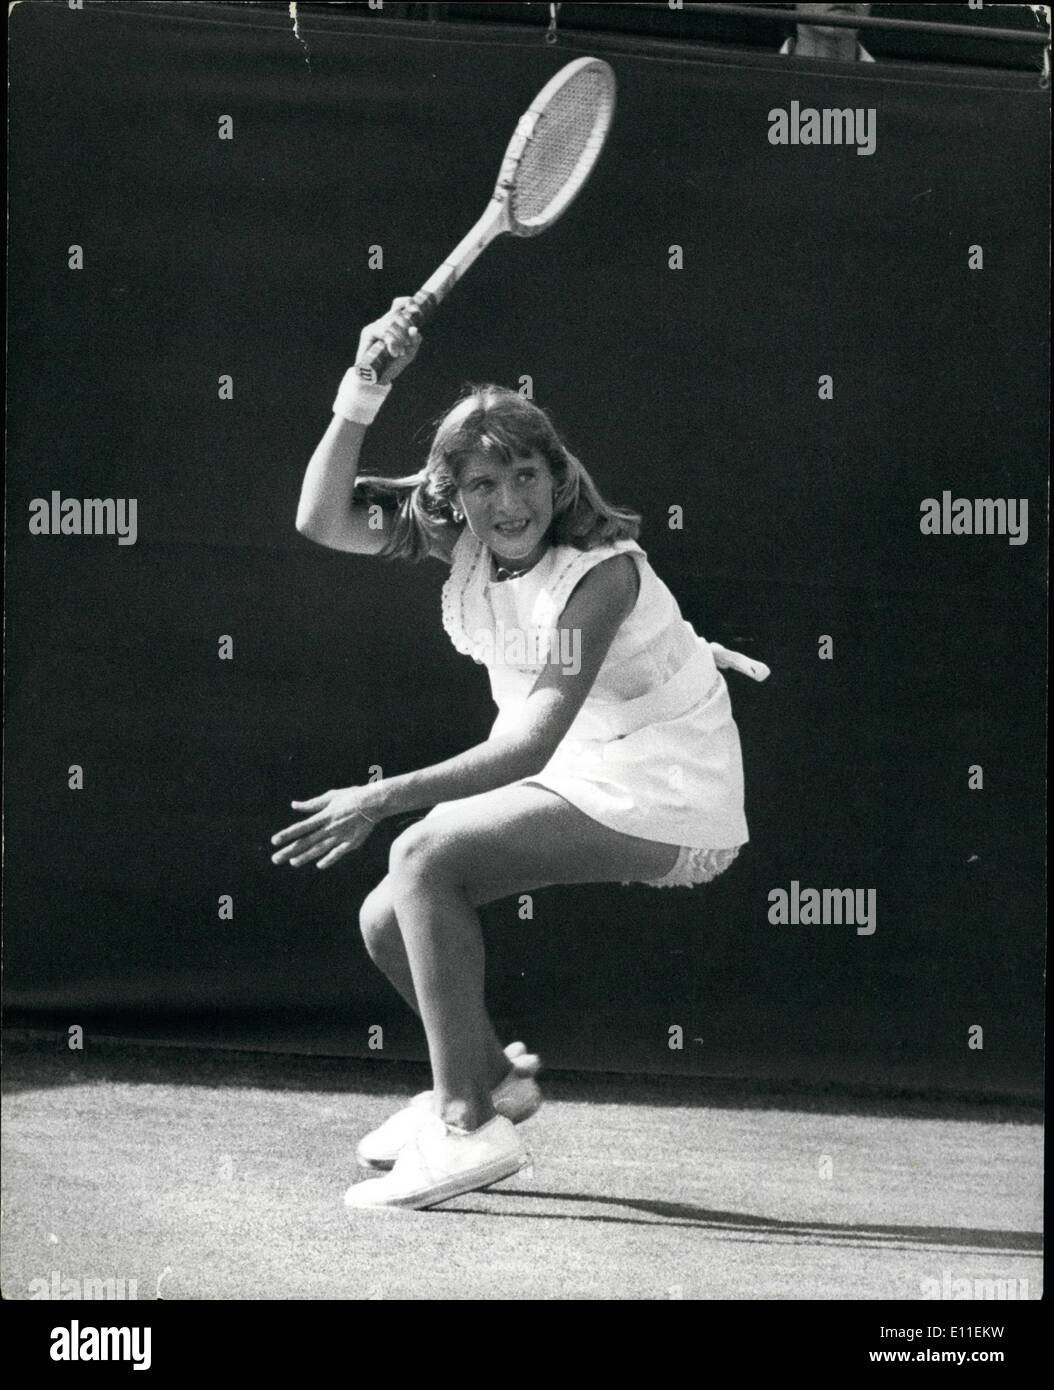 Jun. 06, 1977 - Tracy Austin the 14-year-old American Tennis Star wins her first match at Wimbledon. Photo Shows: Tracy Austin the 14 year-old American tennis star seen in action against Mrs. Vessies Appal of Holland on court 7. She won 6-3 6-3. AM/Keystone Stock Photo